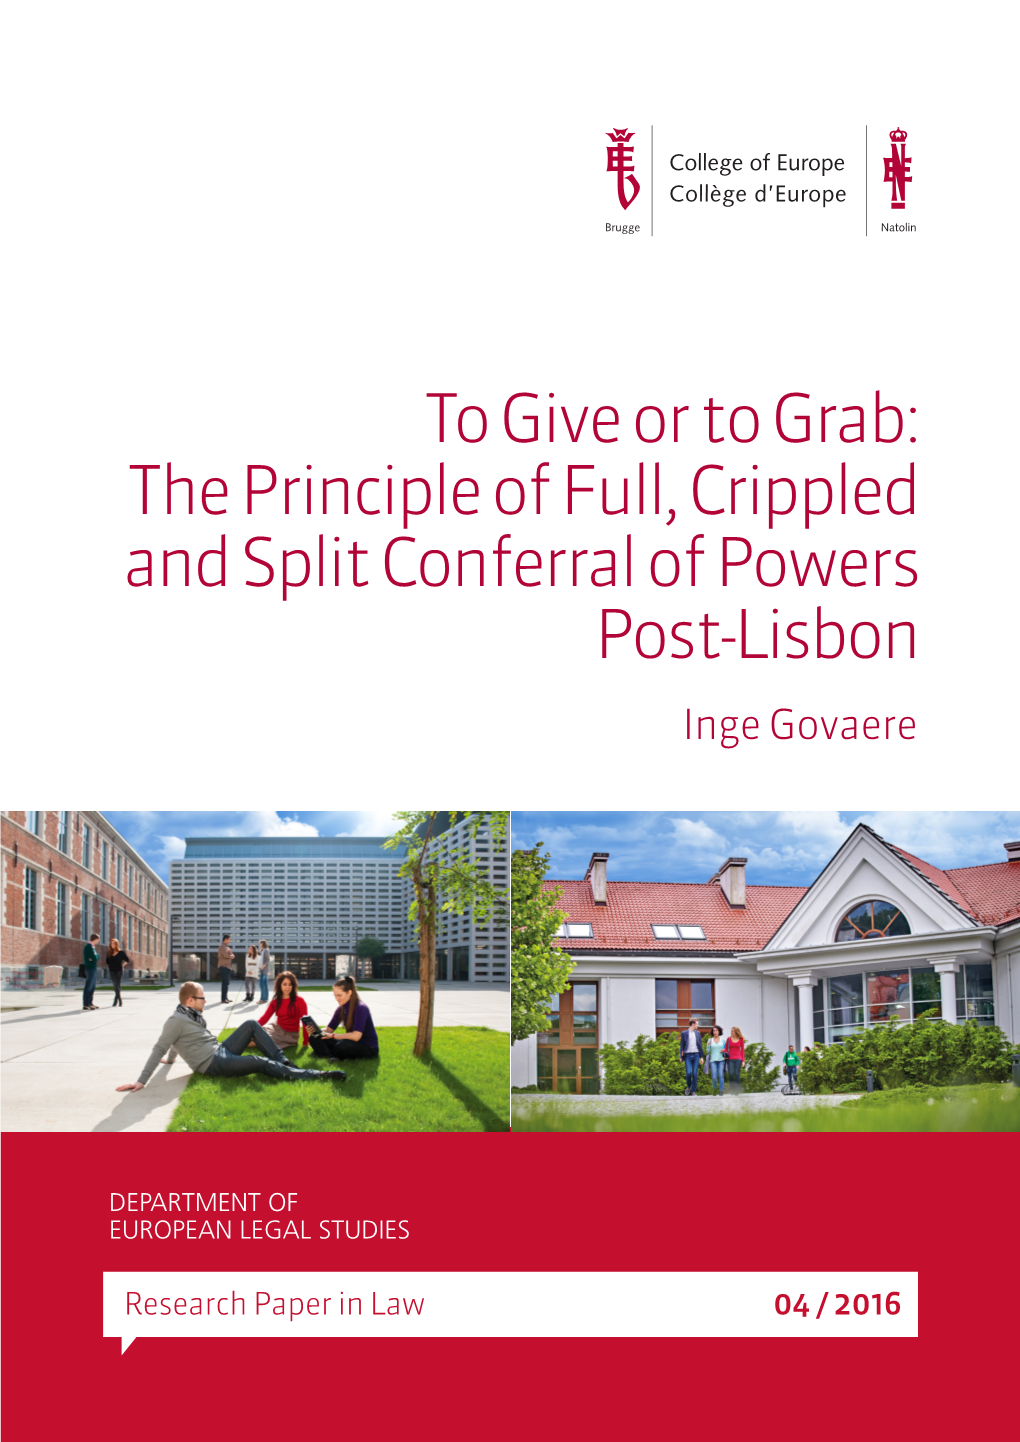 To Give Or to Grab: the Principle of Full, Crippled and Split Conferral of Powers Post-Lisbon Inge Govaere